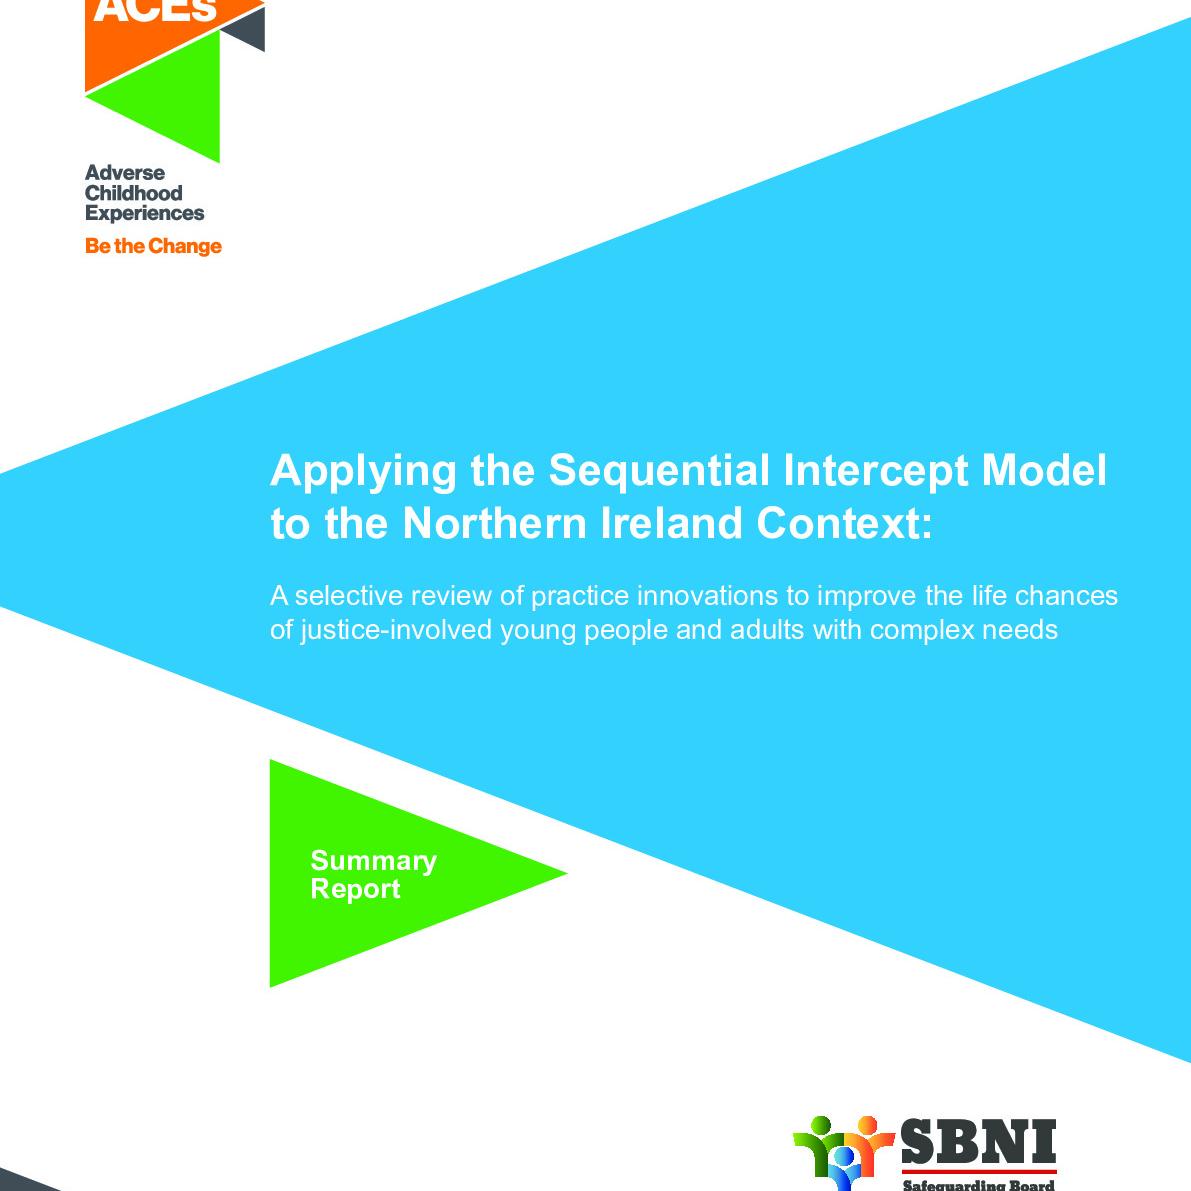 Applying the Sequential Intercept Model to the NI Context (Summary Report)